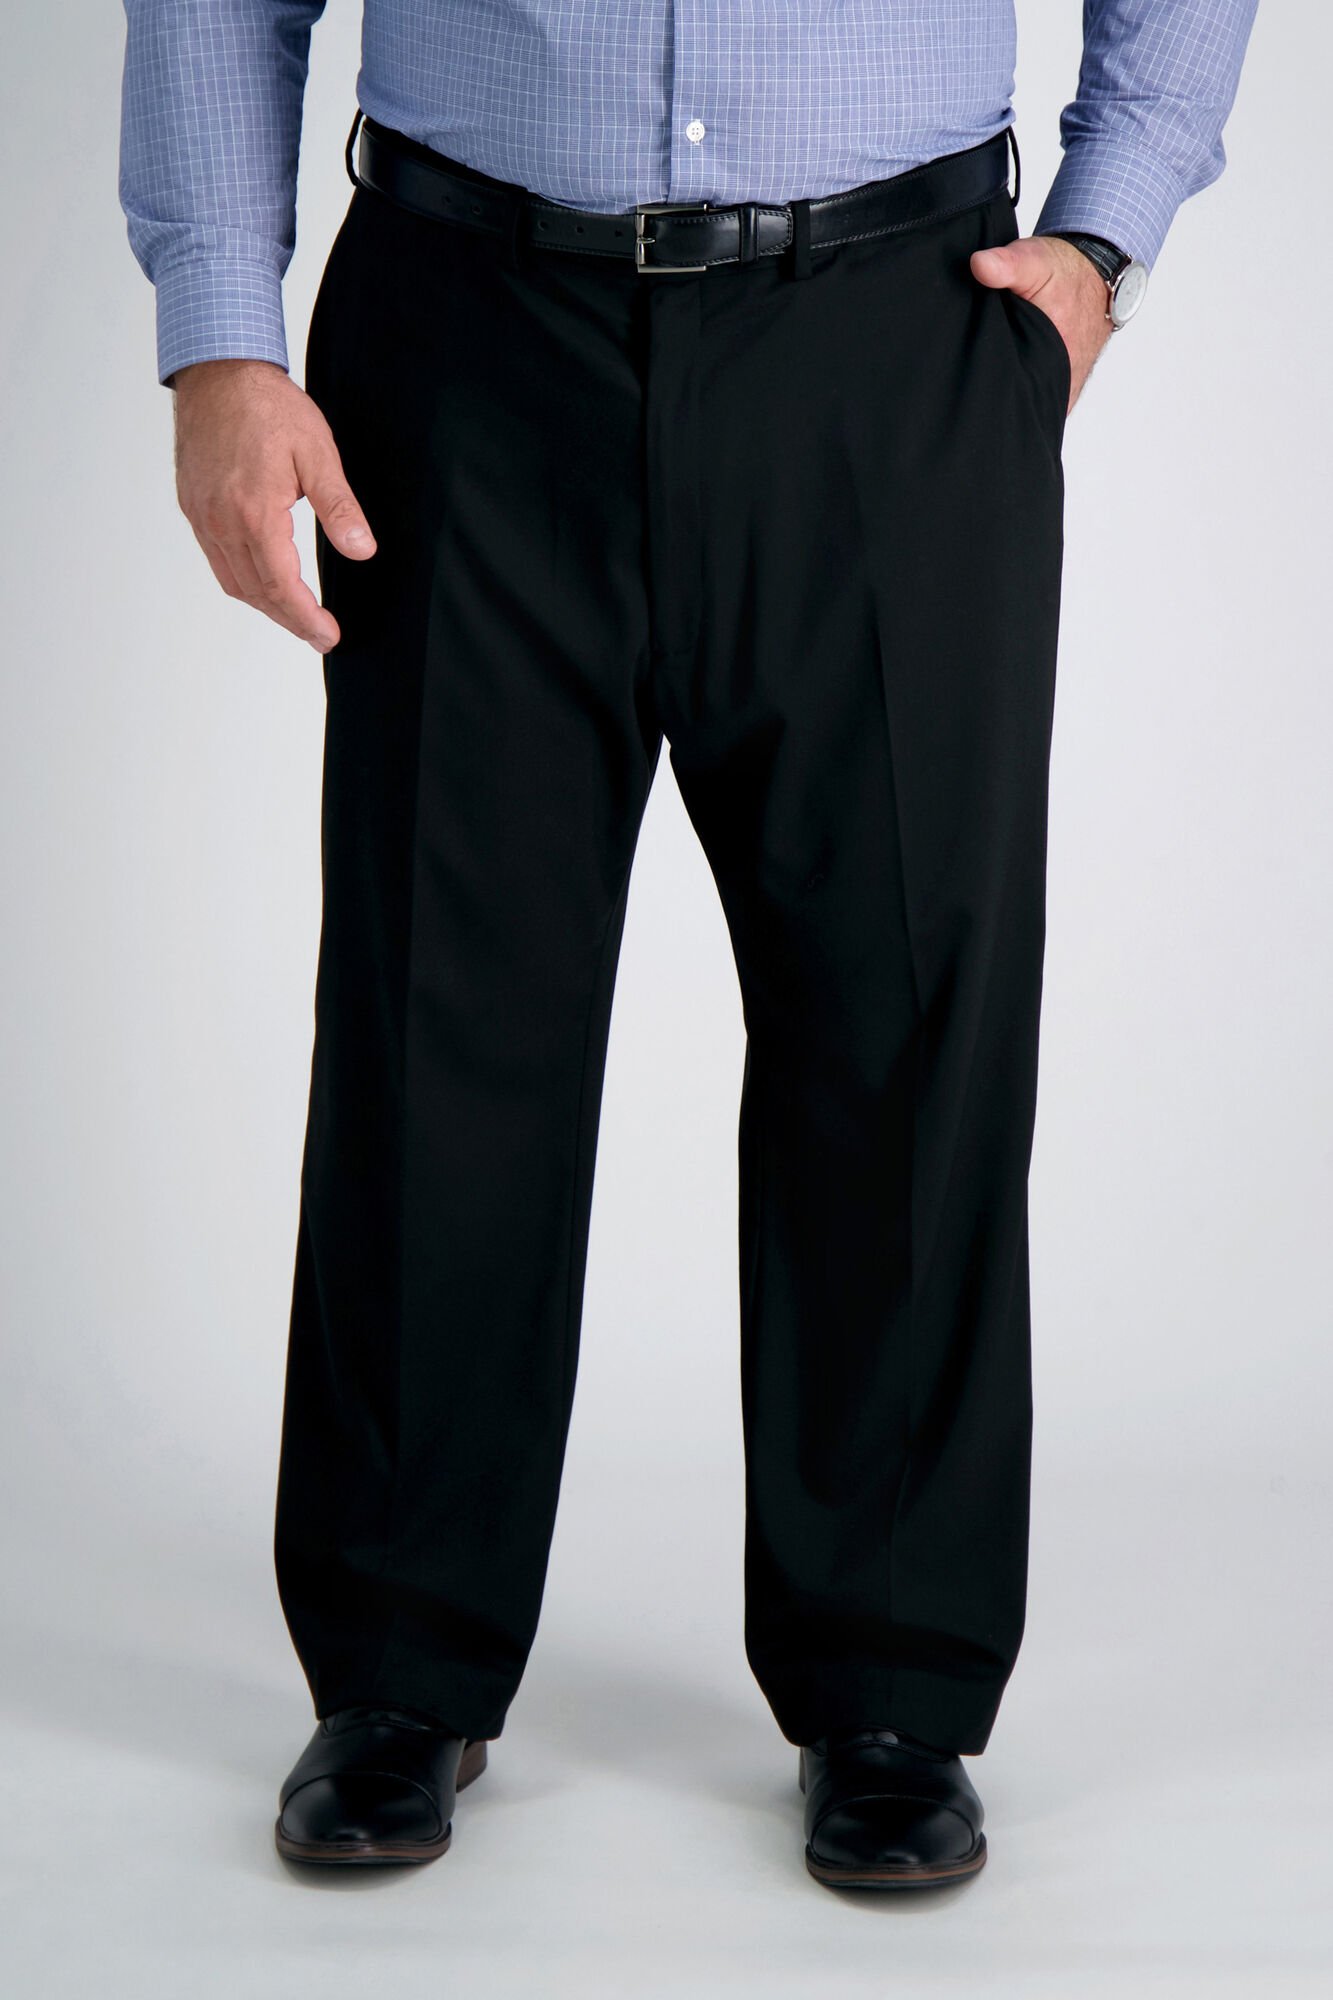 Big & Tall J.M. Haggar Premium Stretch Suit Pant - Flat Front Black Big & Tall Classic Fit Flat Front Hidden Expandable Waistband: Expands up to 3" 64% Polyester, 34% Viscoe Rayon 2% Spandex Dry Clean Only Imported Style #: HY90182 Size - L